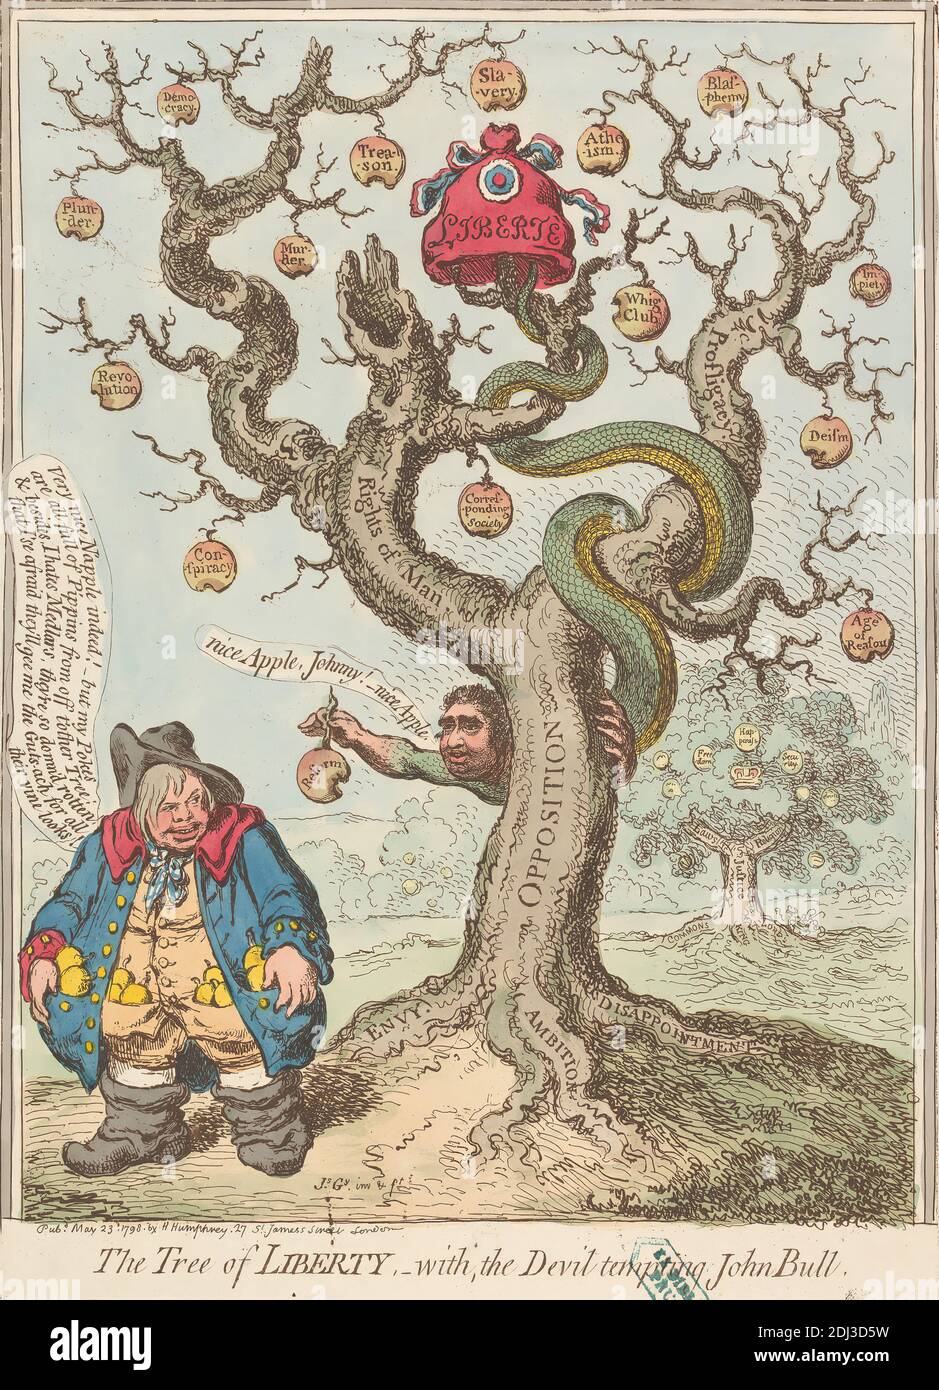 The Tree of Liberty, - With The Devil Tempting John Bull (Fox), James Gillray, 1757–1815, British, 1798, Etching in brown ink, hand-colored, Sheet: 14 3/8 x 10 7/16in. (36.5 x 26.5cm Stock Photo